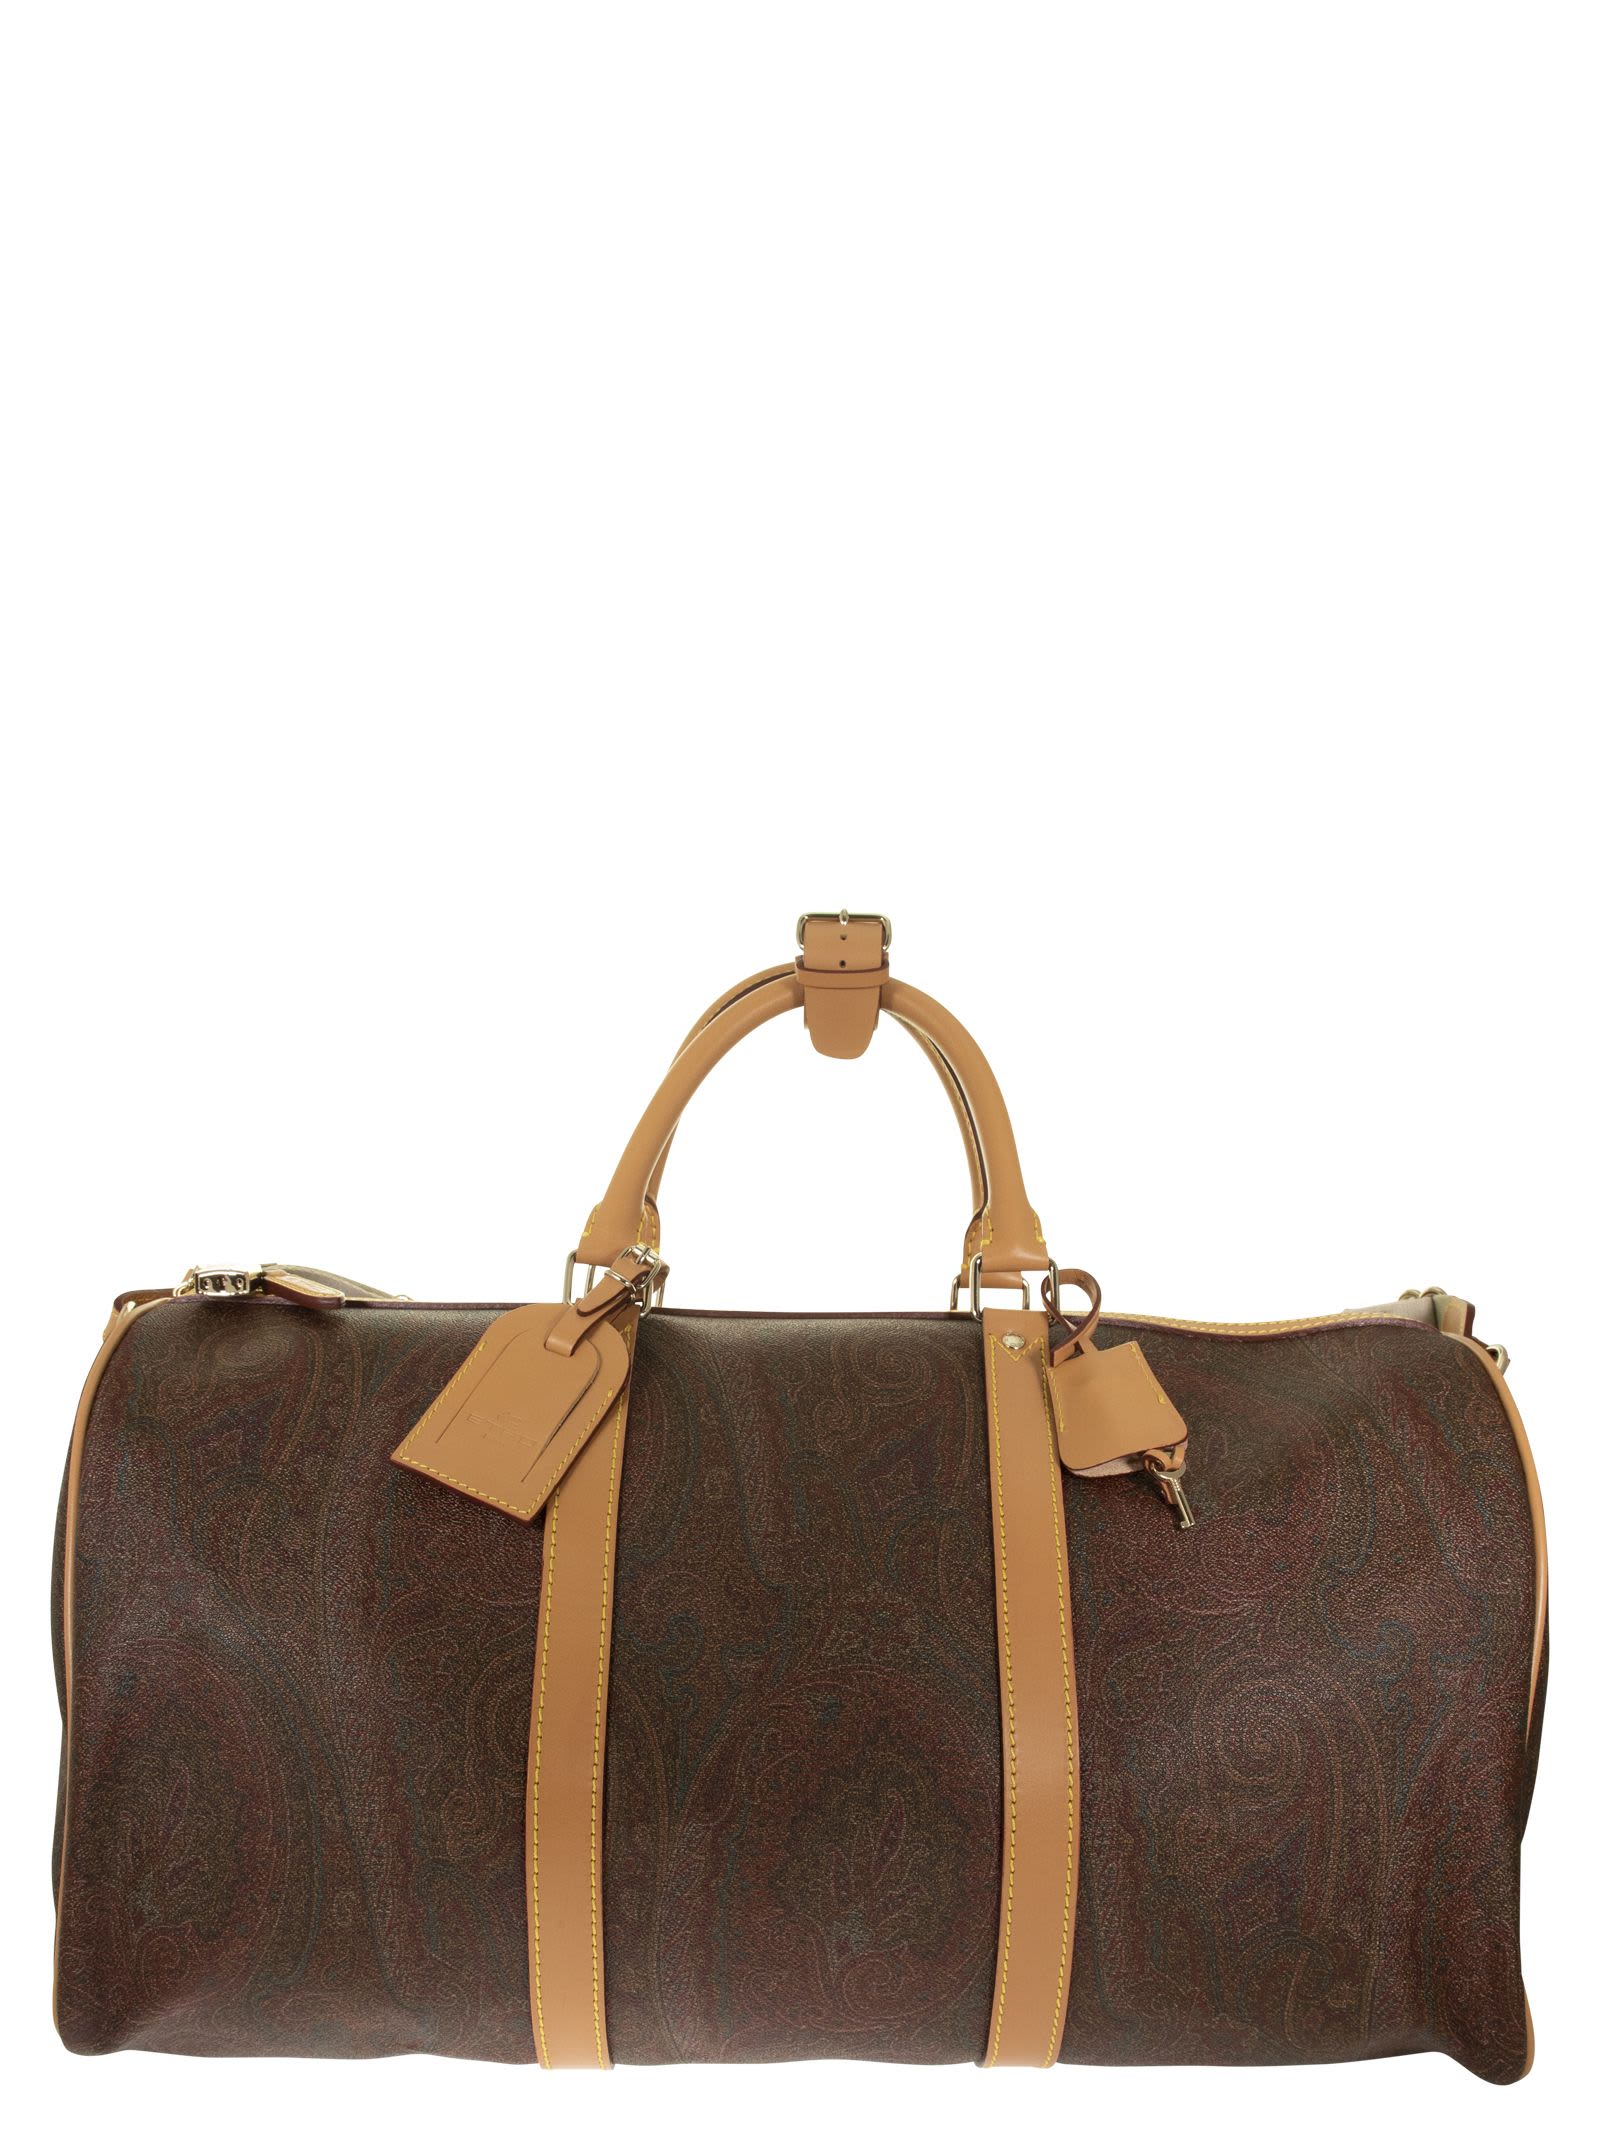 Etro Paisley Travel Bag With Shoulder Strap